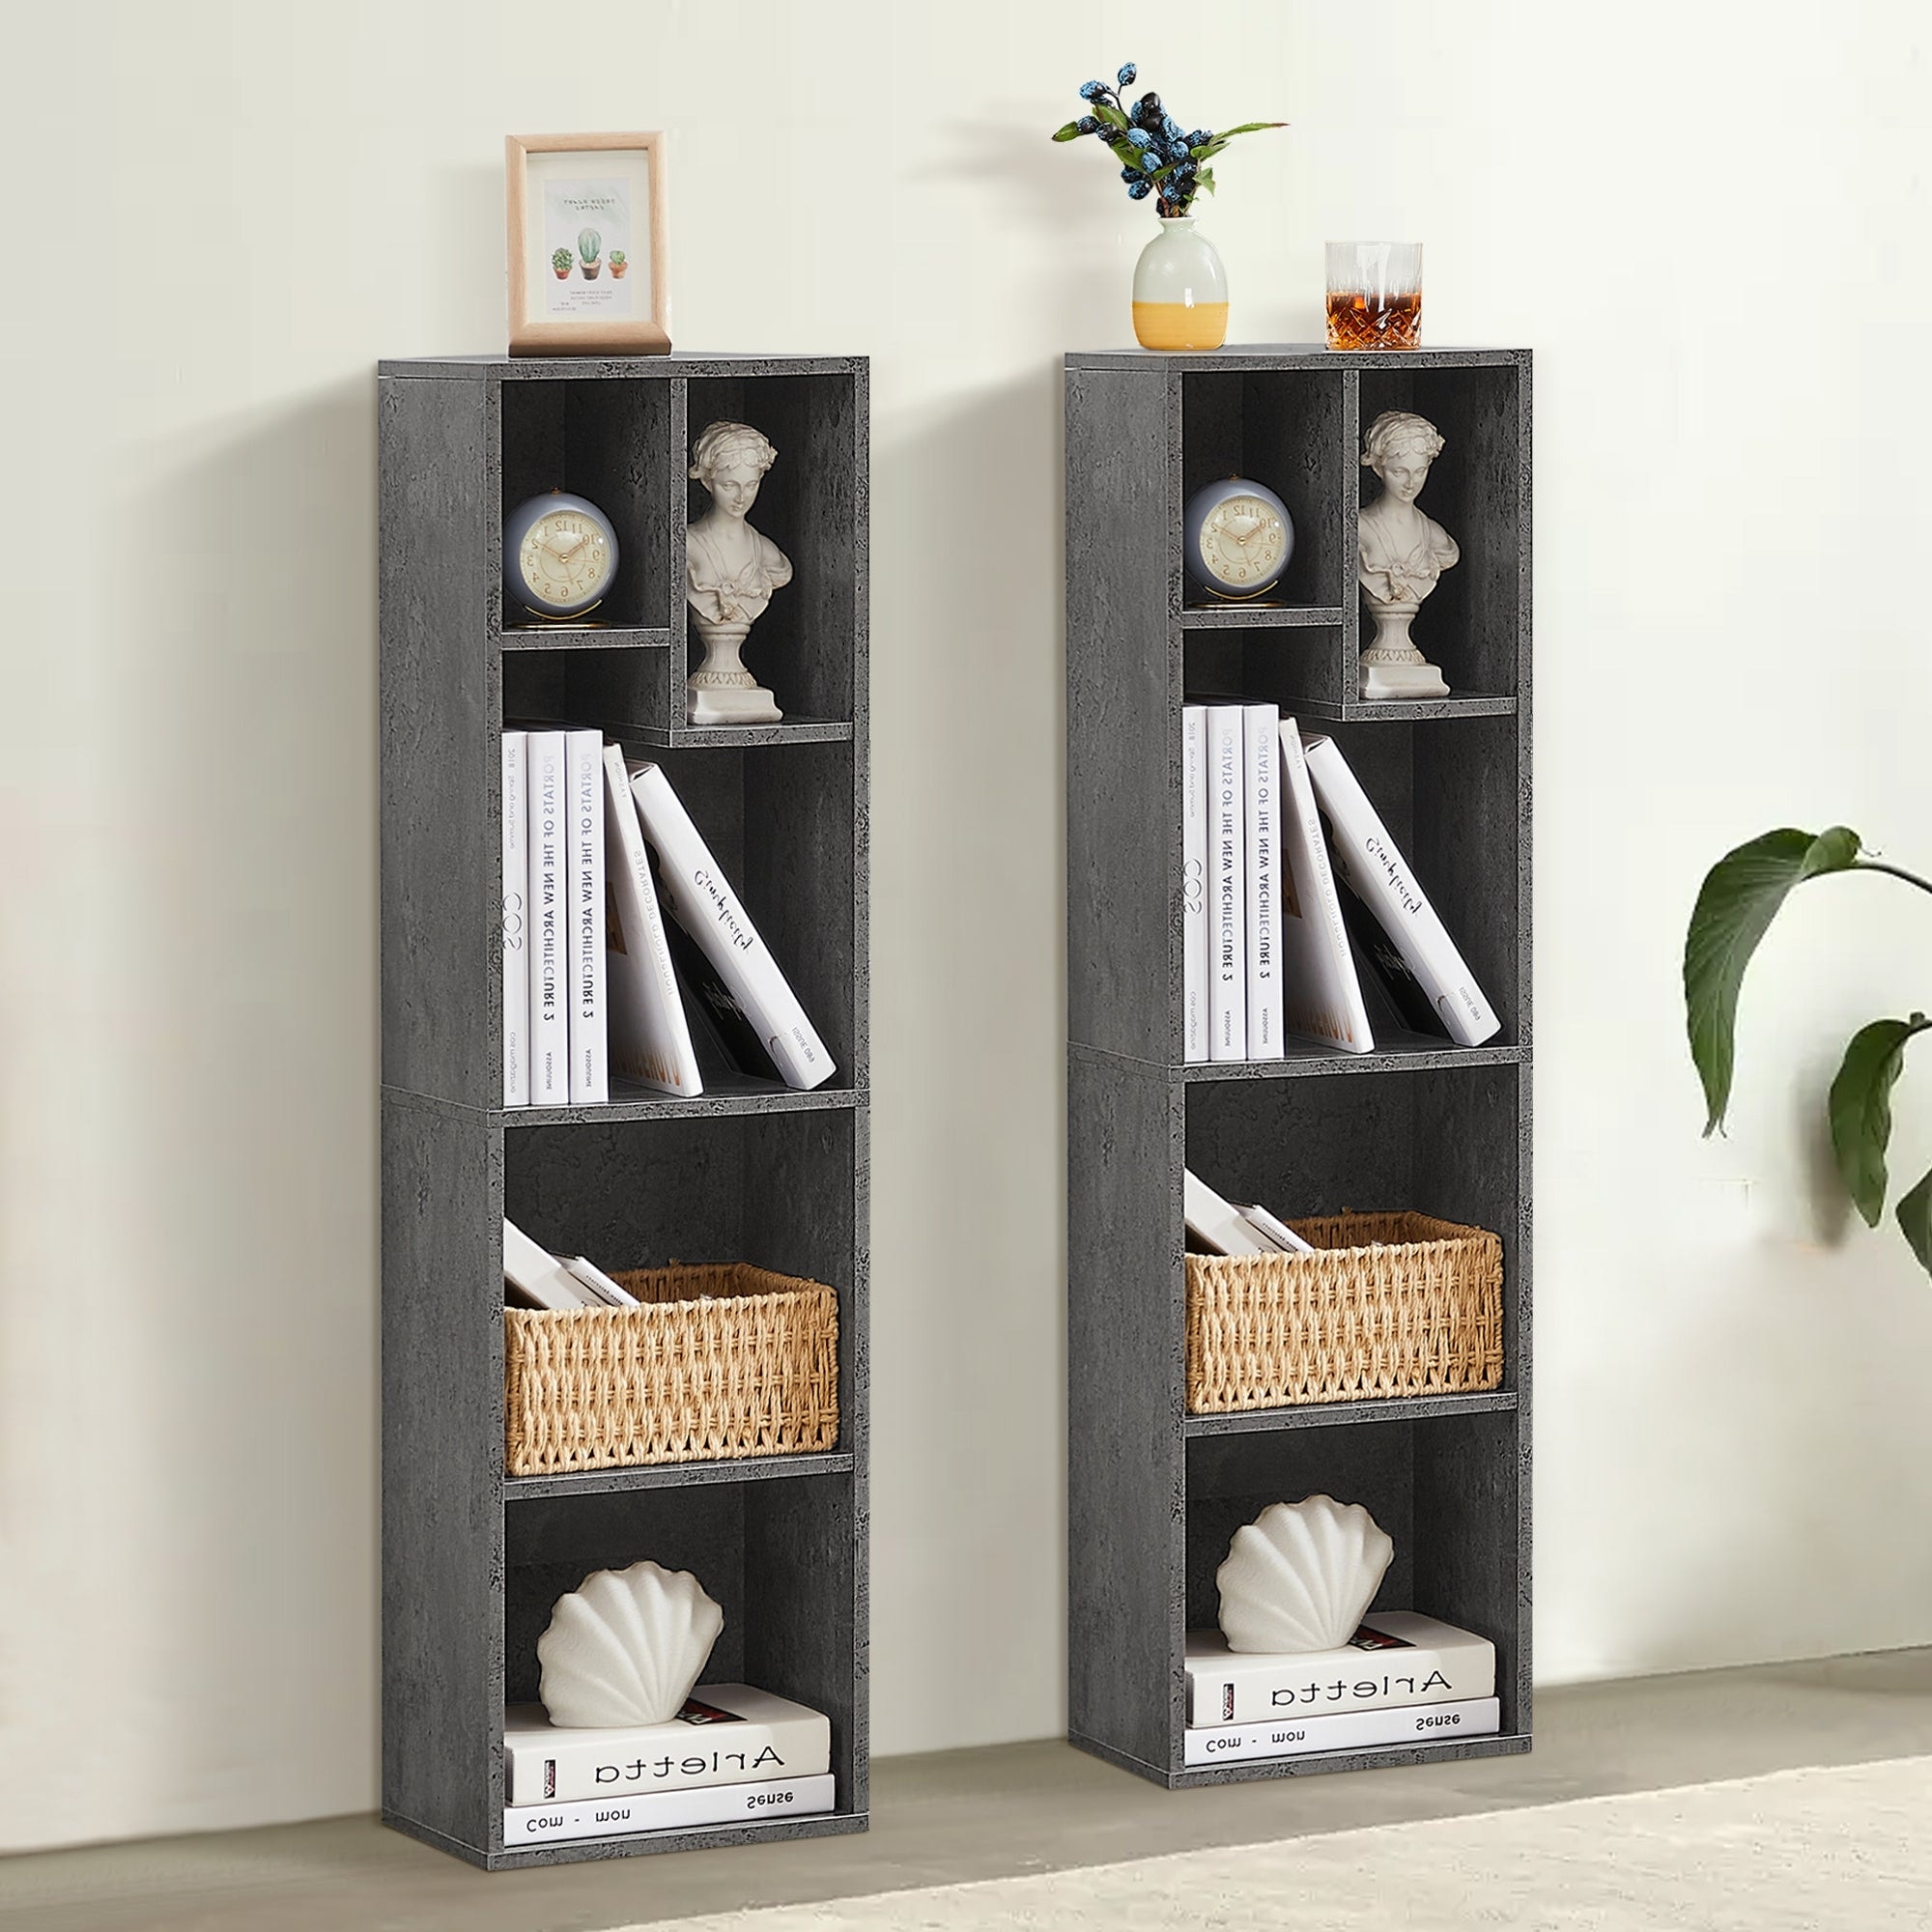 https://ak1.ostkcdn.com/images/products/is/images/direct/26aa36674549febc8c2ed041914564628f12dba8/5-Tier-Bookshelf%2C-Set-of-2-Tall-Bookcase-Shelf-Storage-Organizer%2C-Modern-Book-Shelf-for-Bedroom%2C-Living-Room-and-Home-Office.jpg